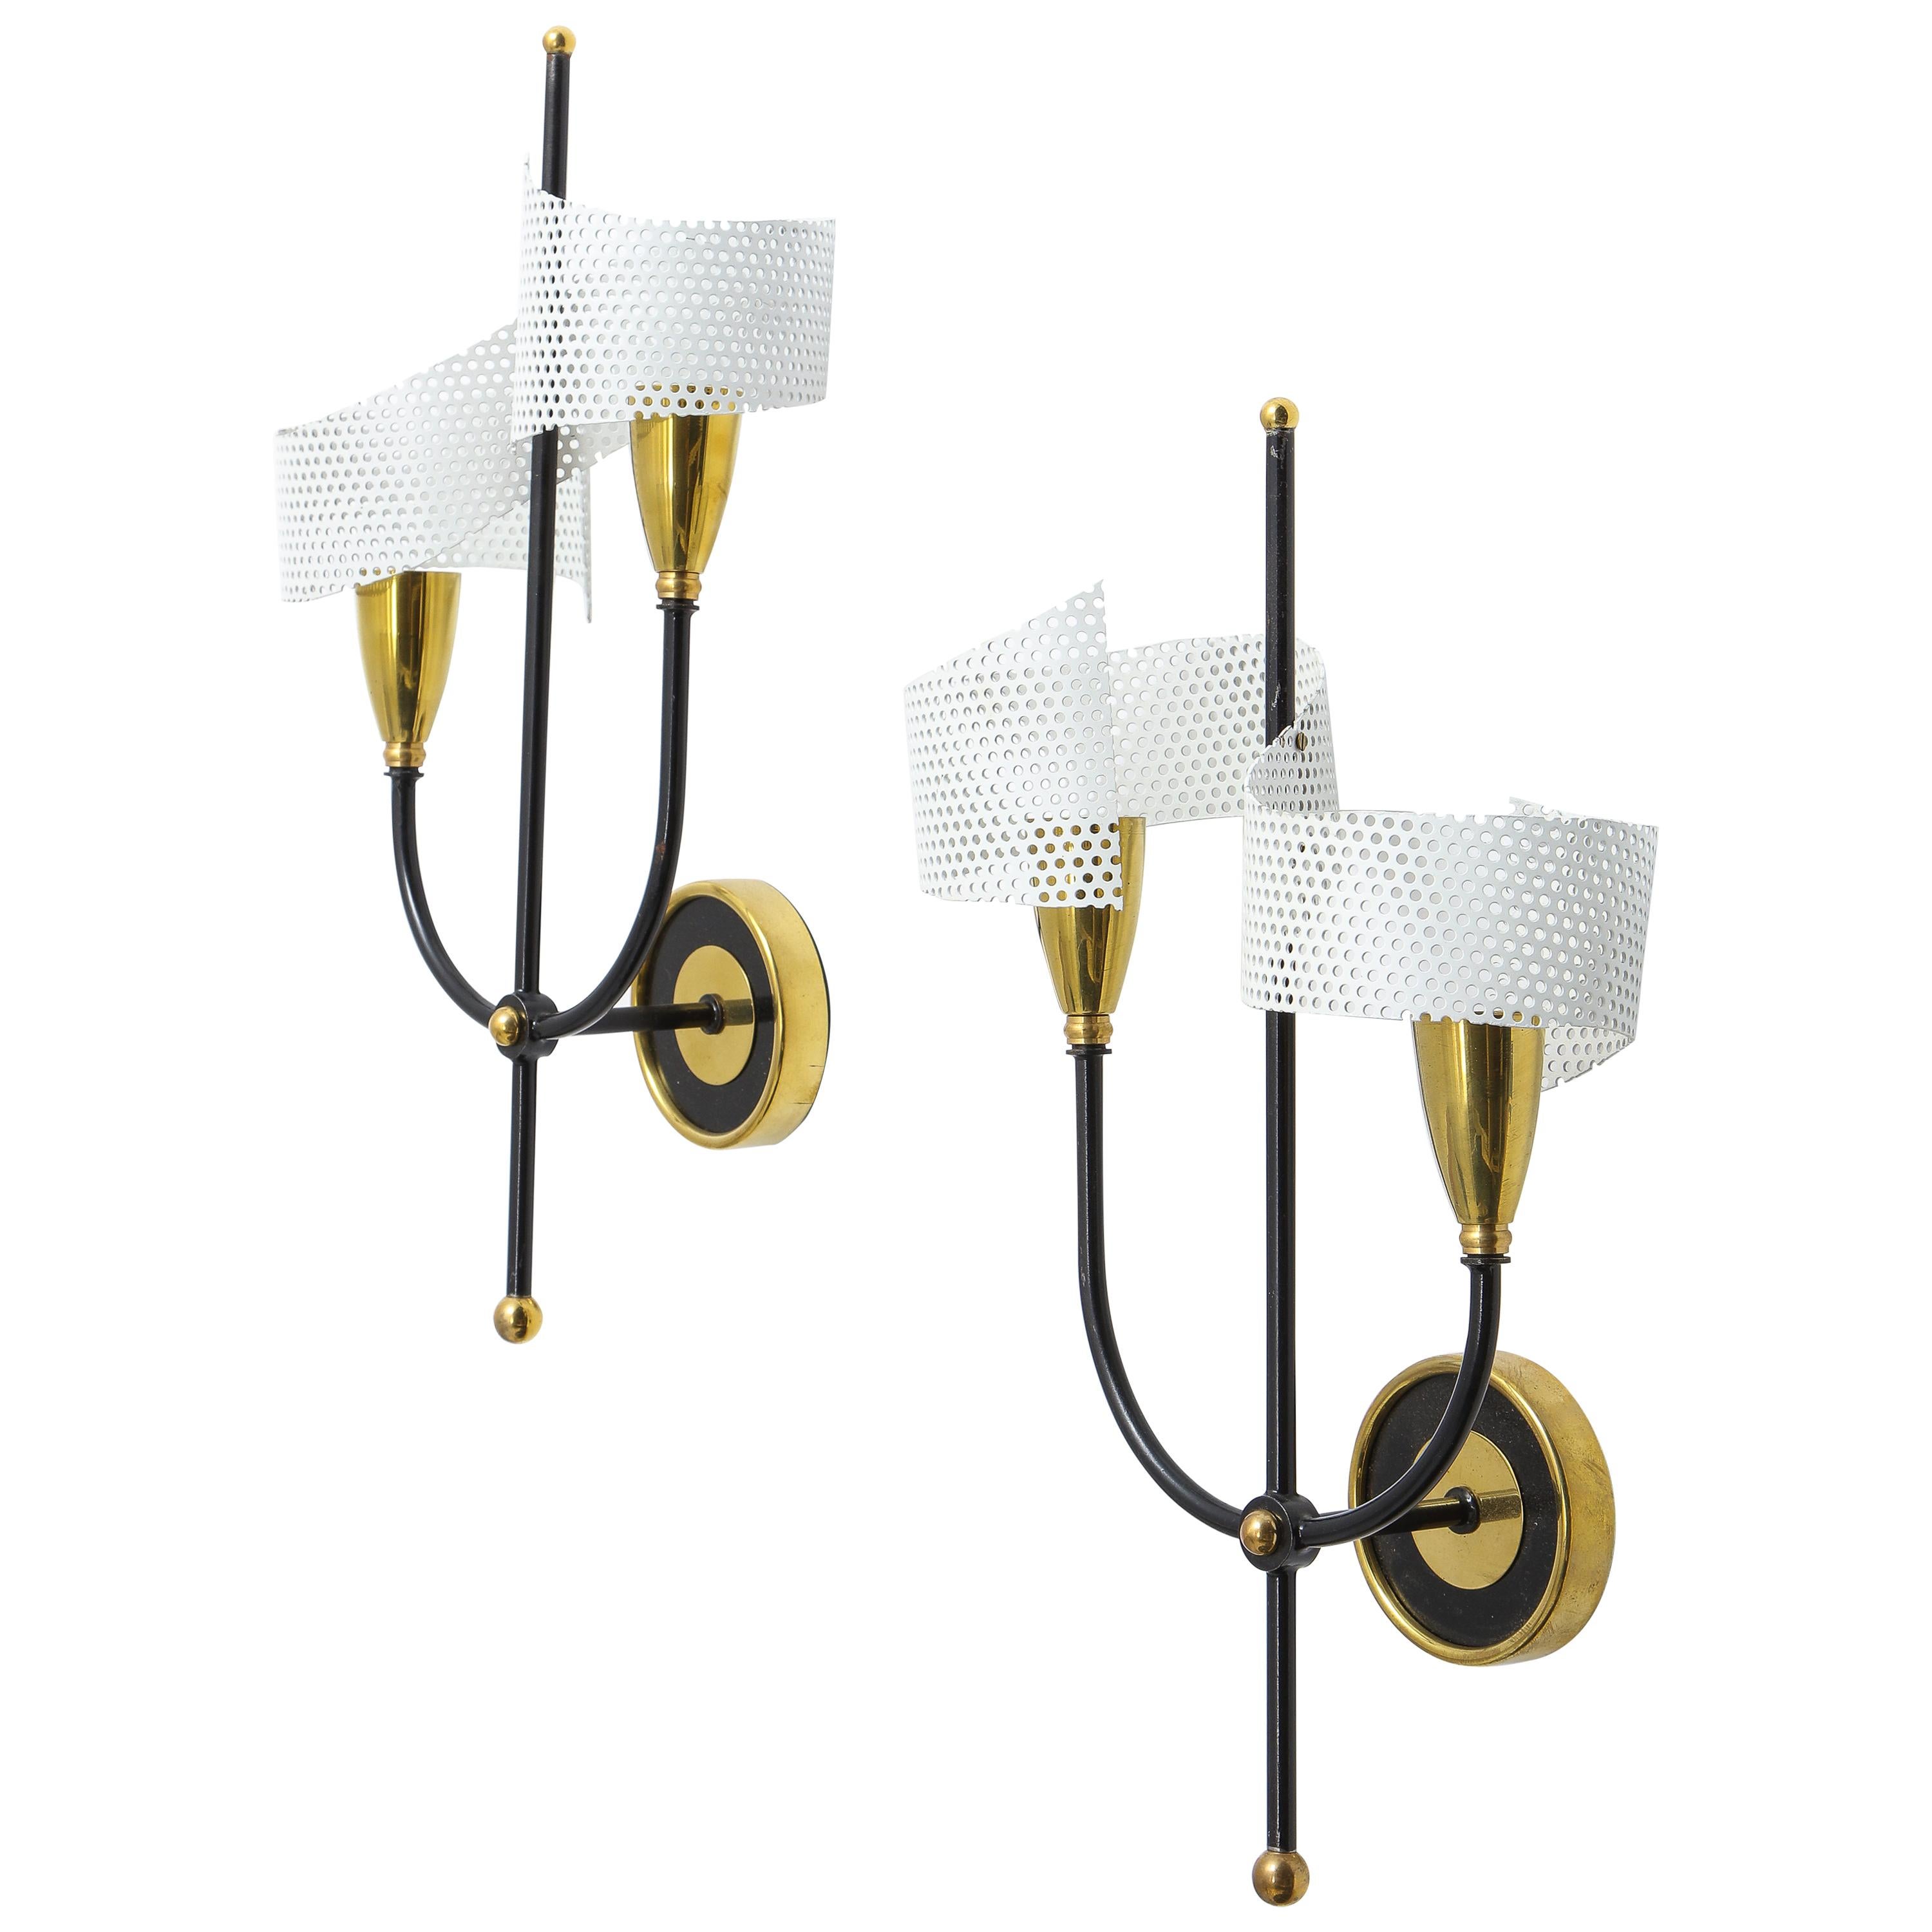 Pair of Scrolled Sconces in Brass and Aluminium by Mathieu, France, 1950s For Sale